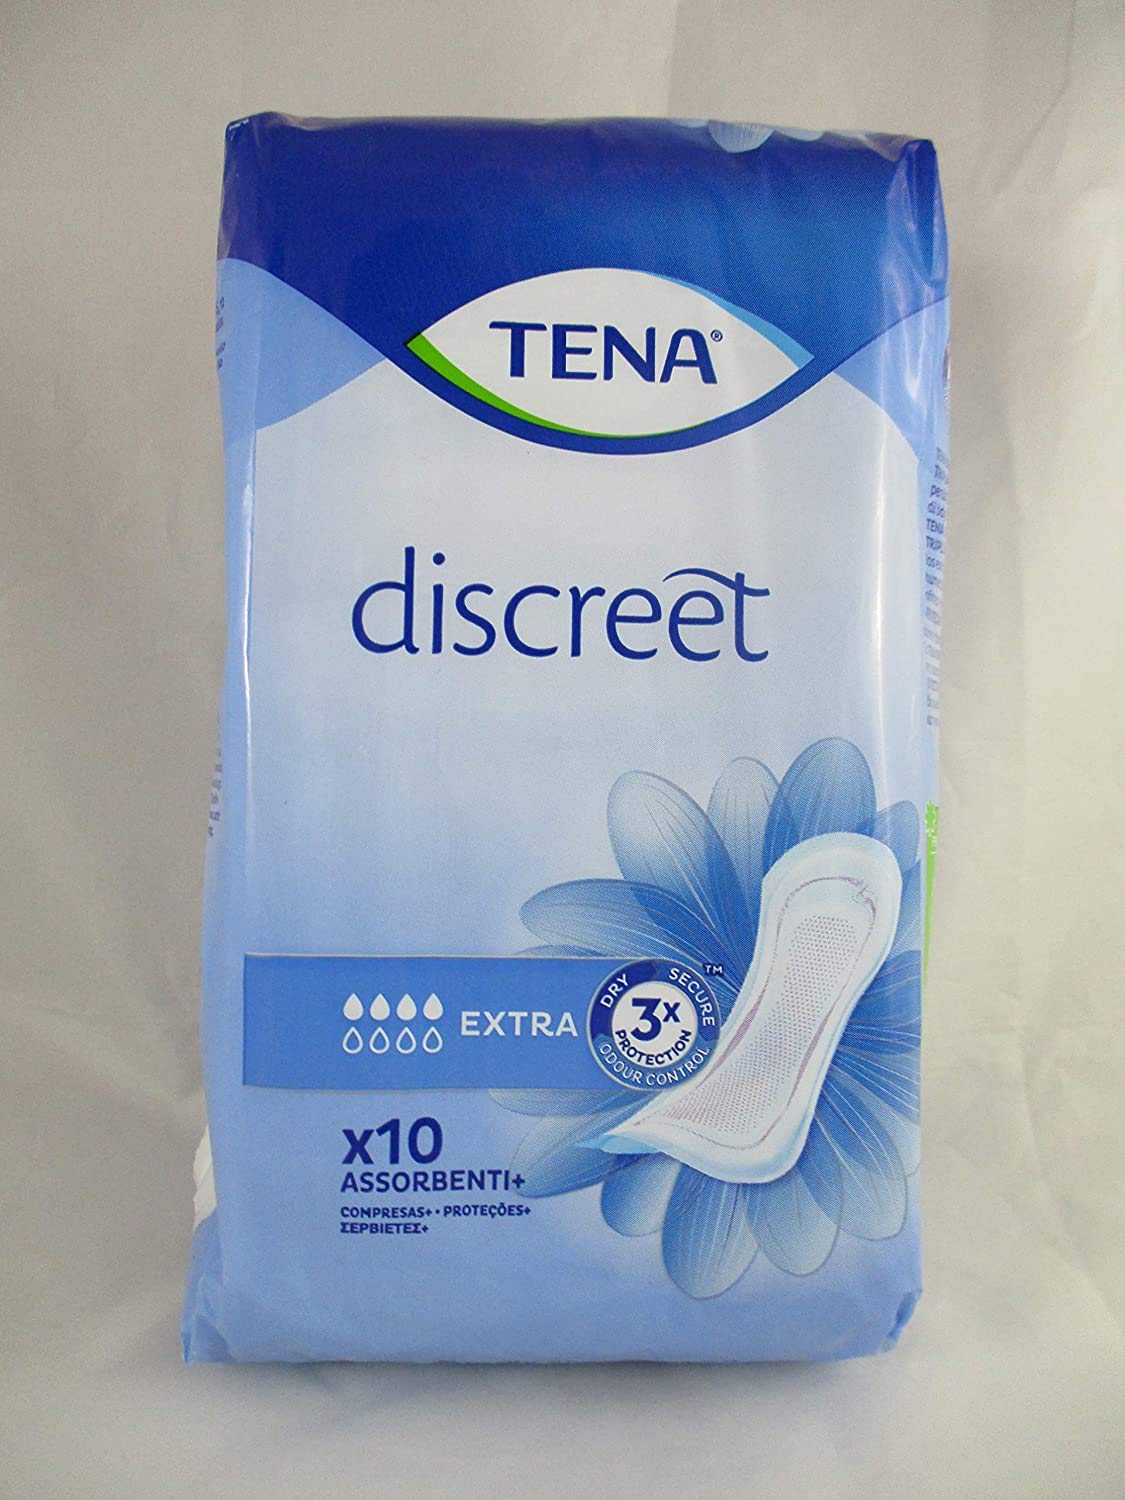 Tena Lady Extra Pads - 3 Packs of 10 (Total 30 Pads)